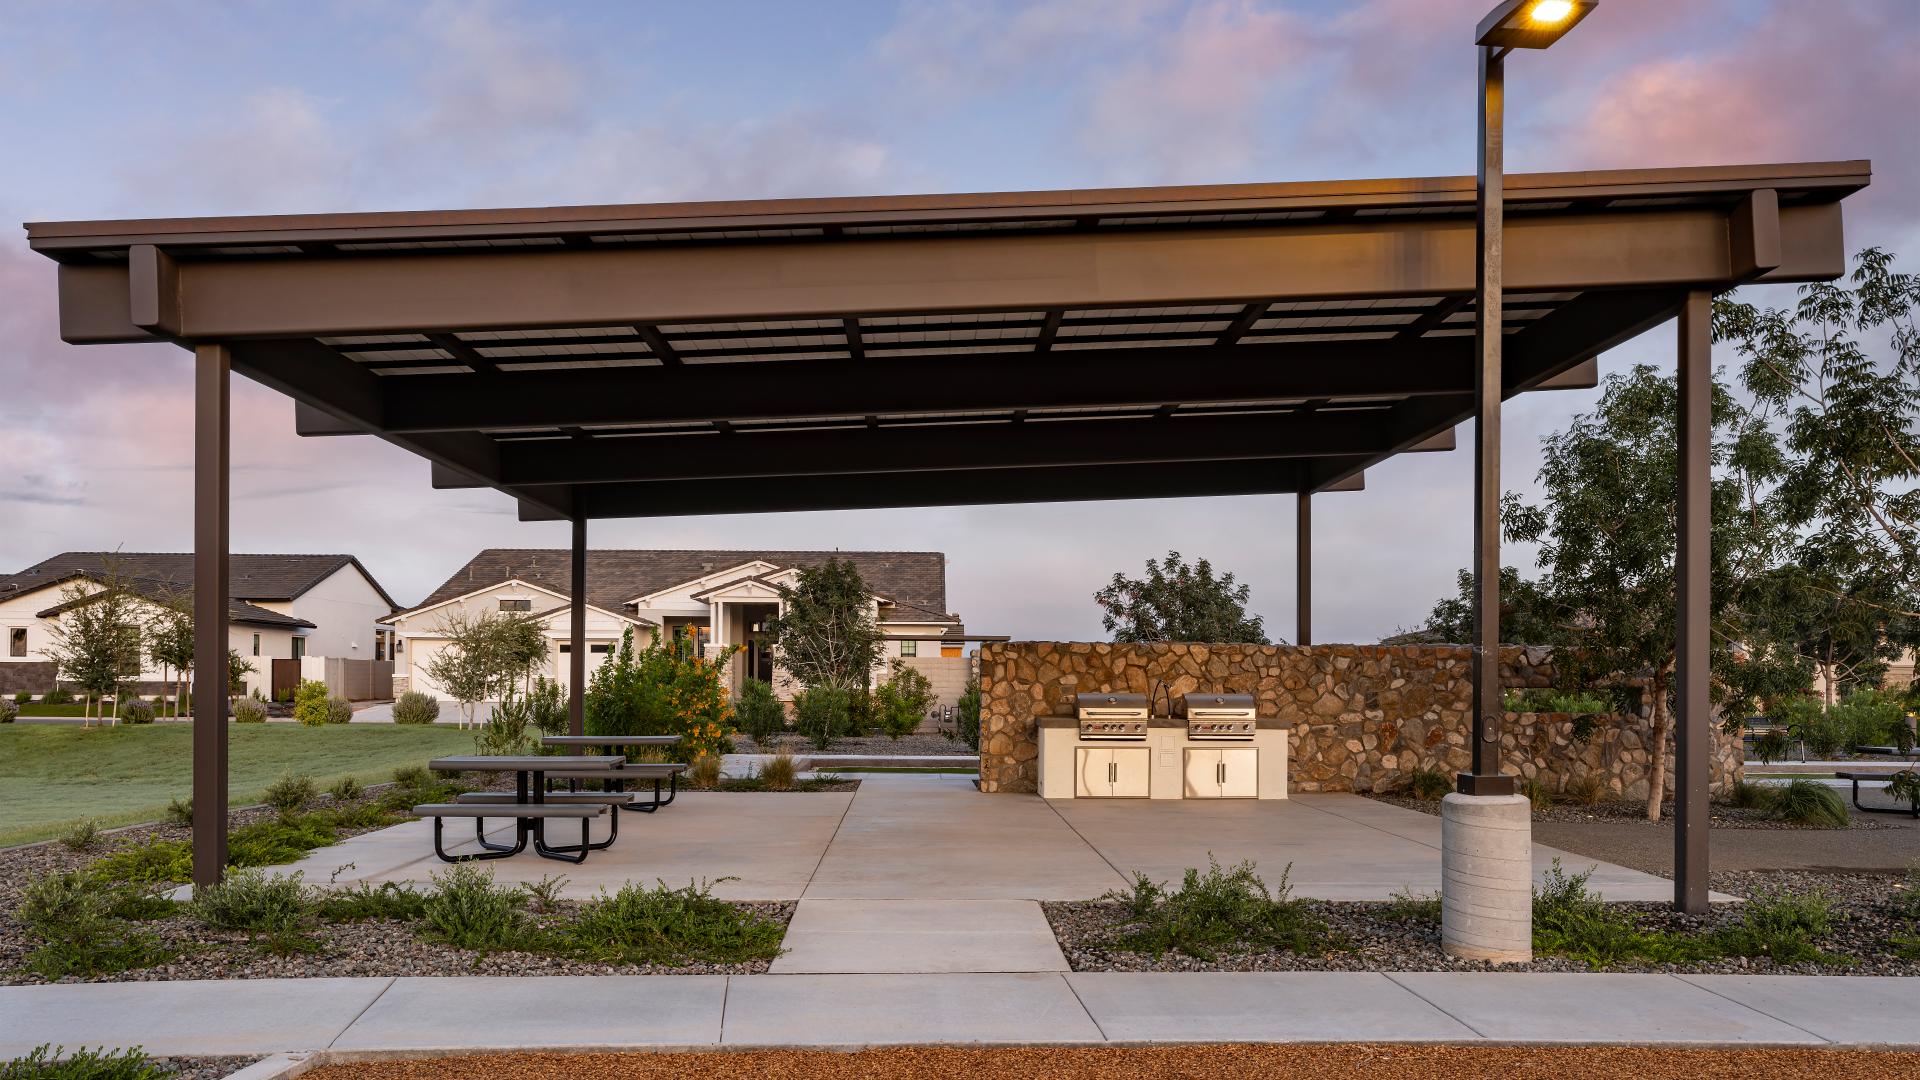 Outdoor community kitchen with covered seating